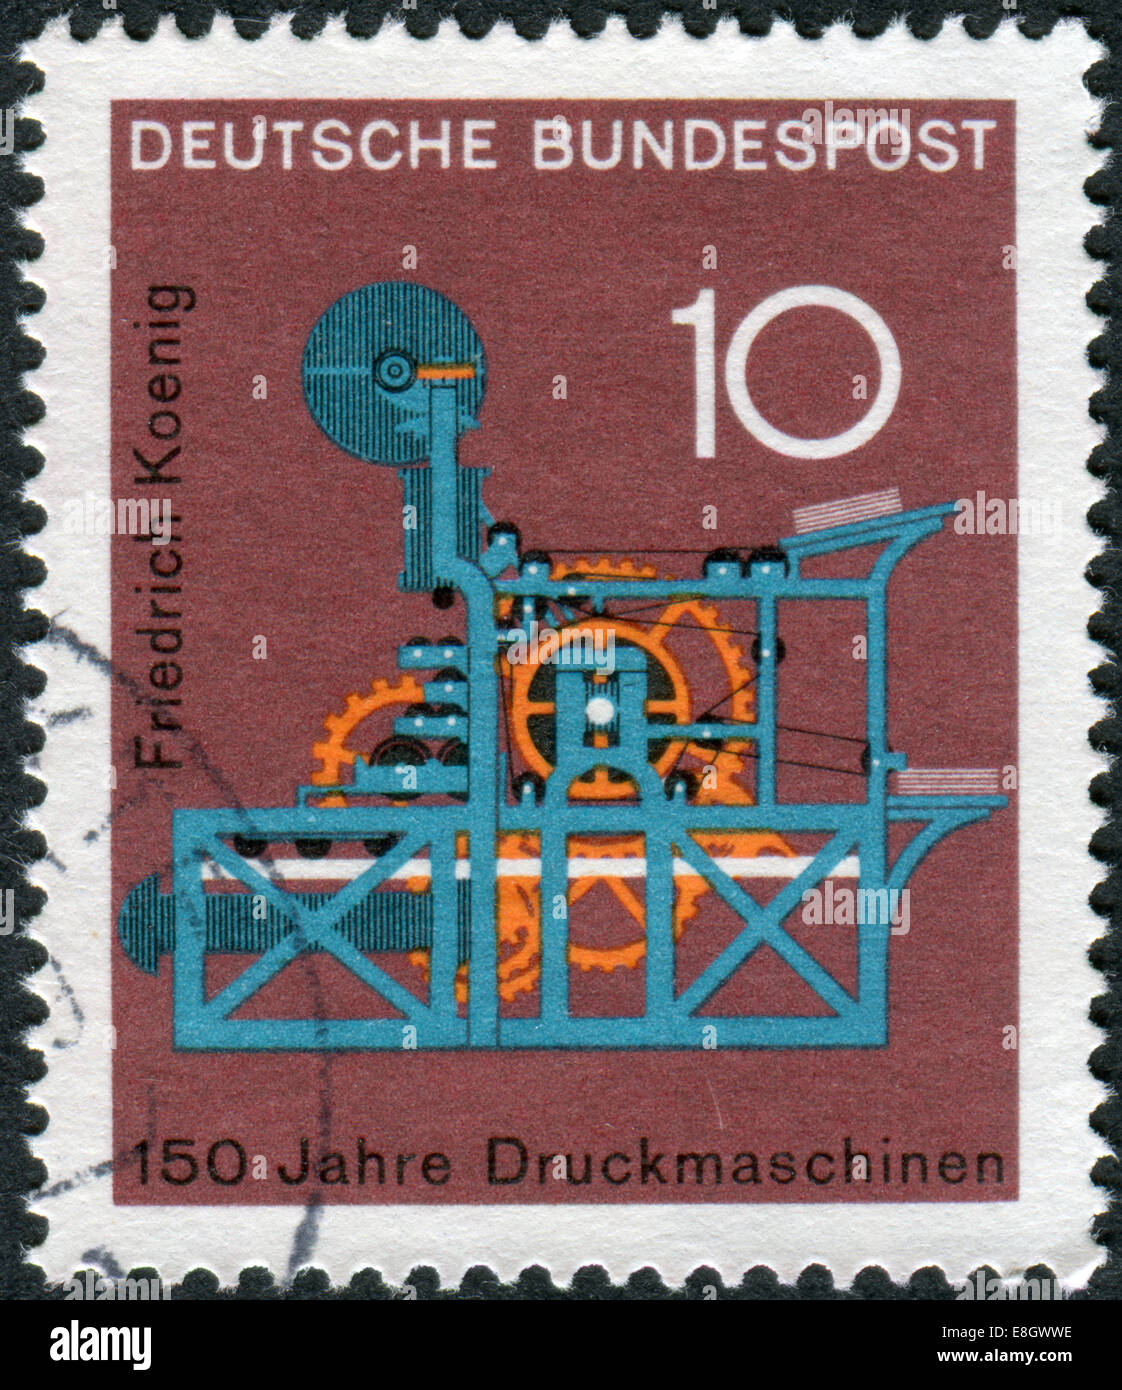 Postage stamp printed in Germany, dedicated to the 150th anniversary of the Koenig printing press Stock Photo